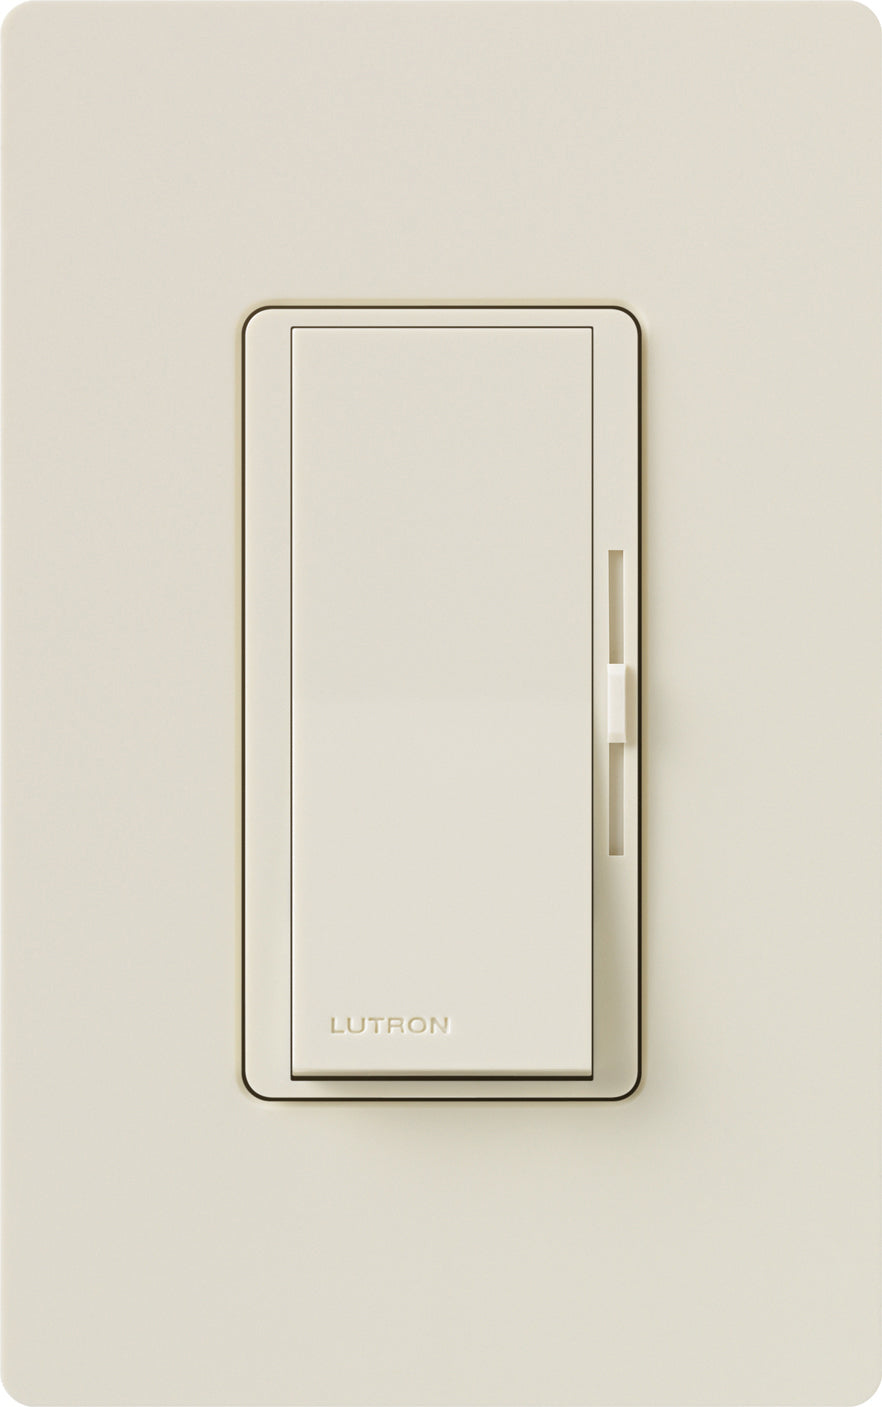 Electronic LV dimmer, 300W